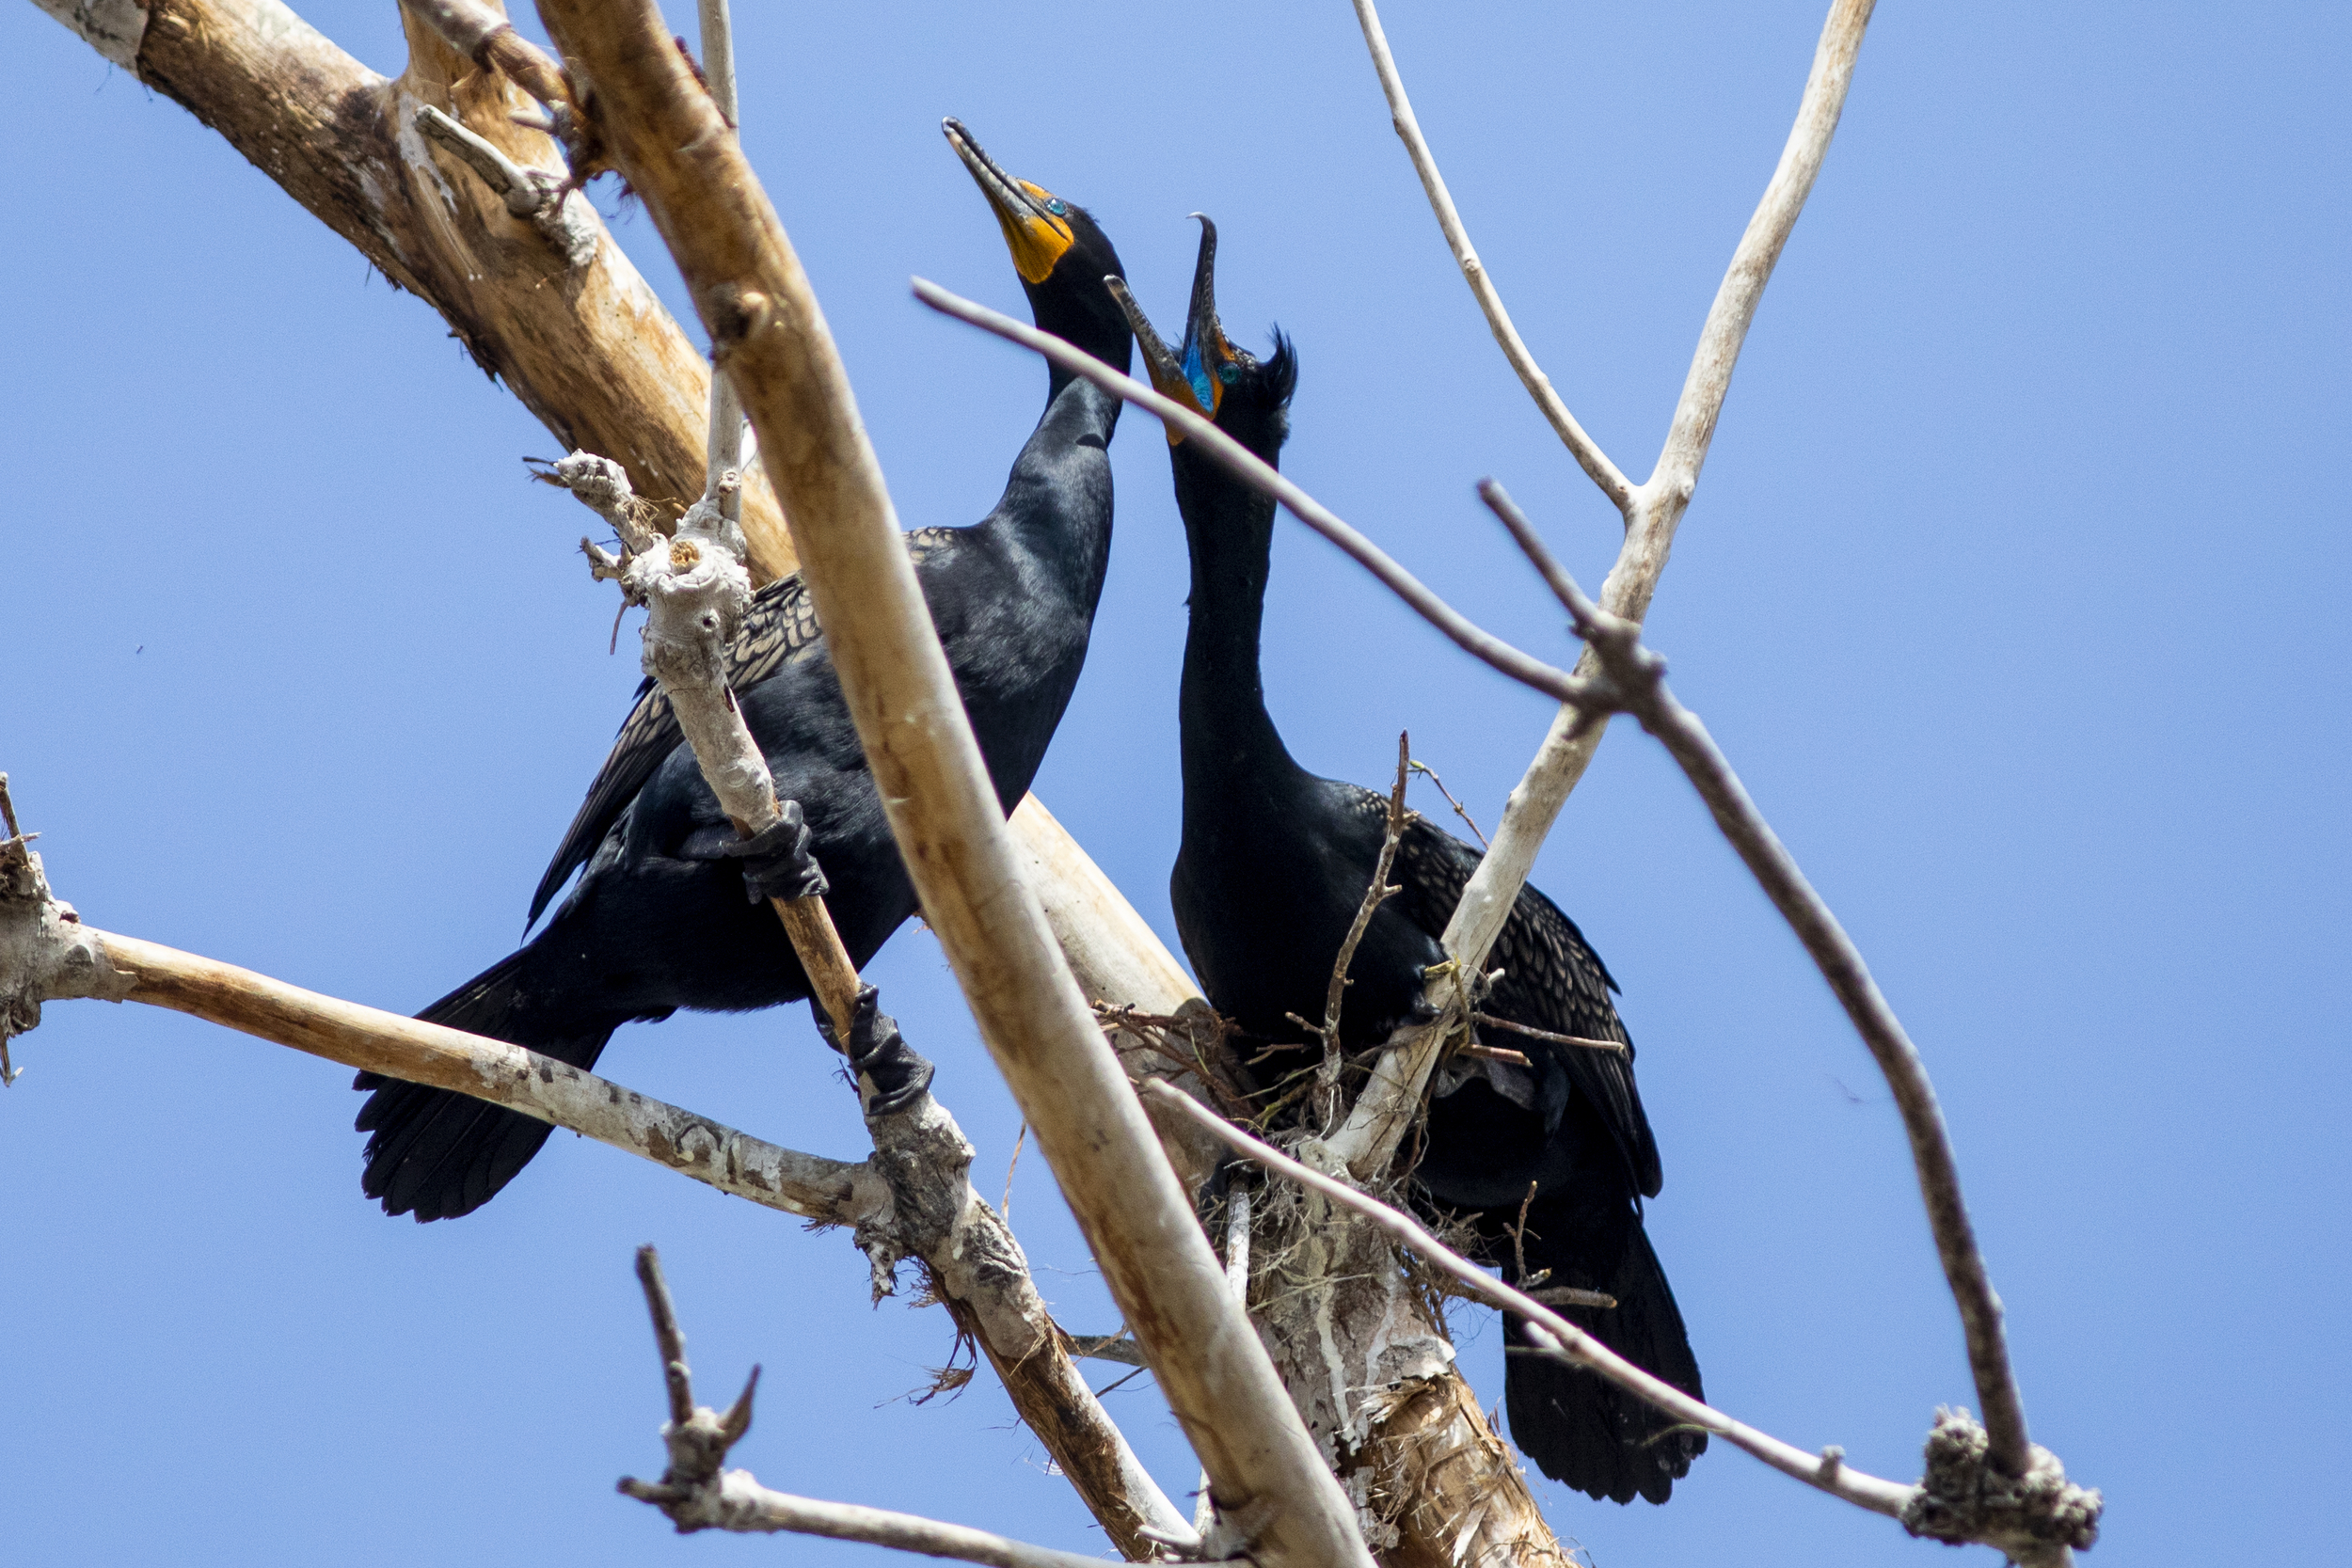 A pair of black cormorants on a bare, dead tree branch against a blue sky.